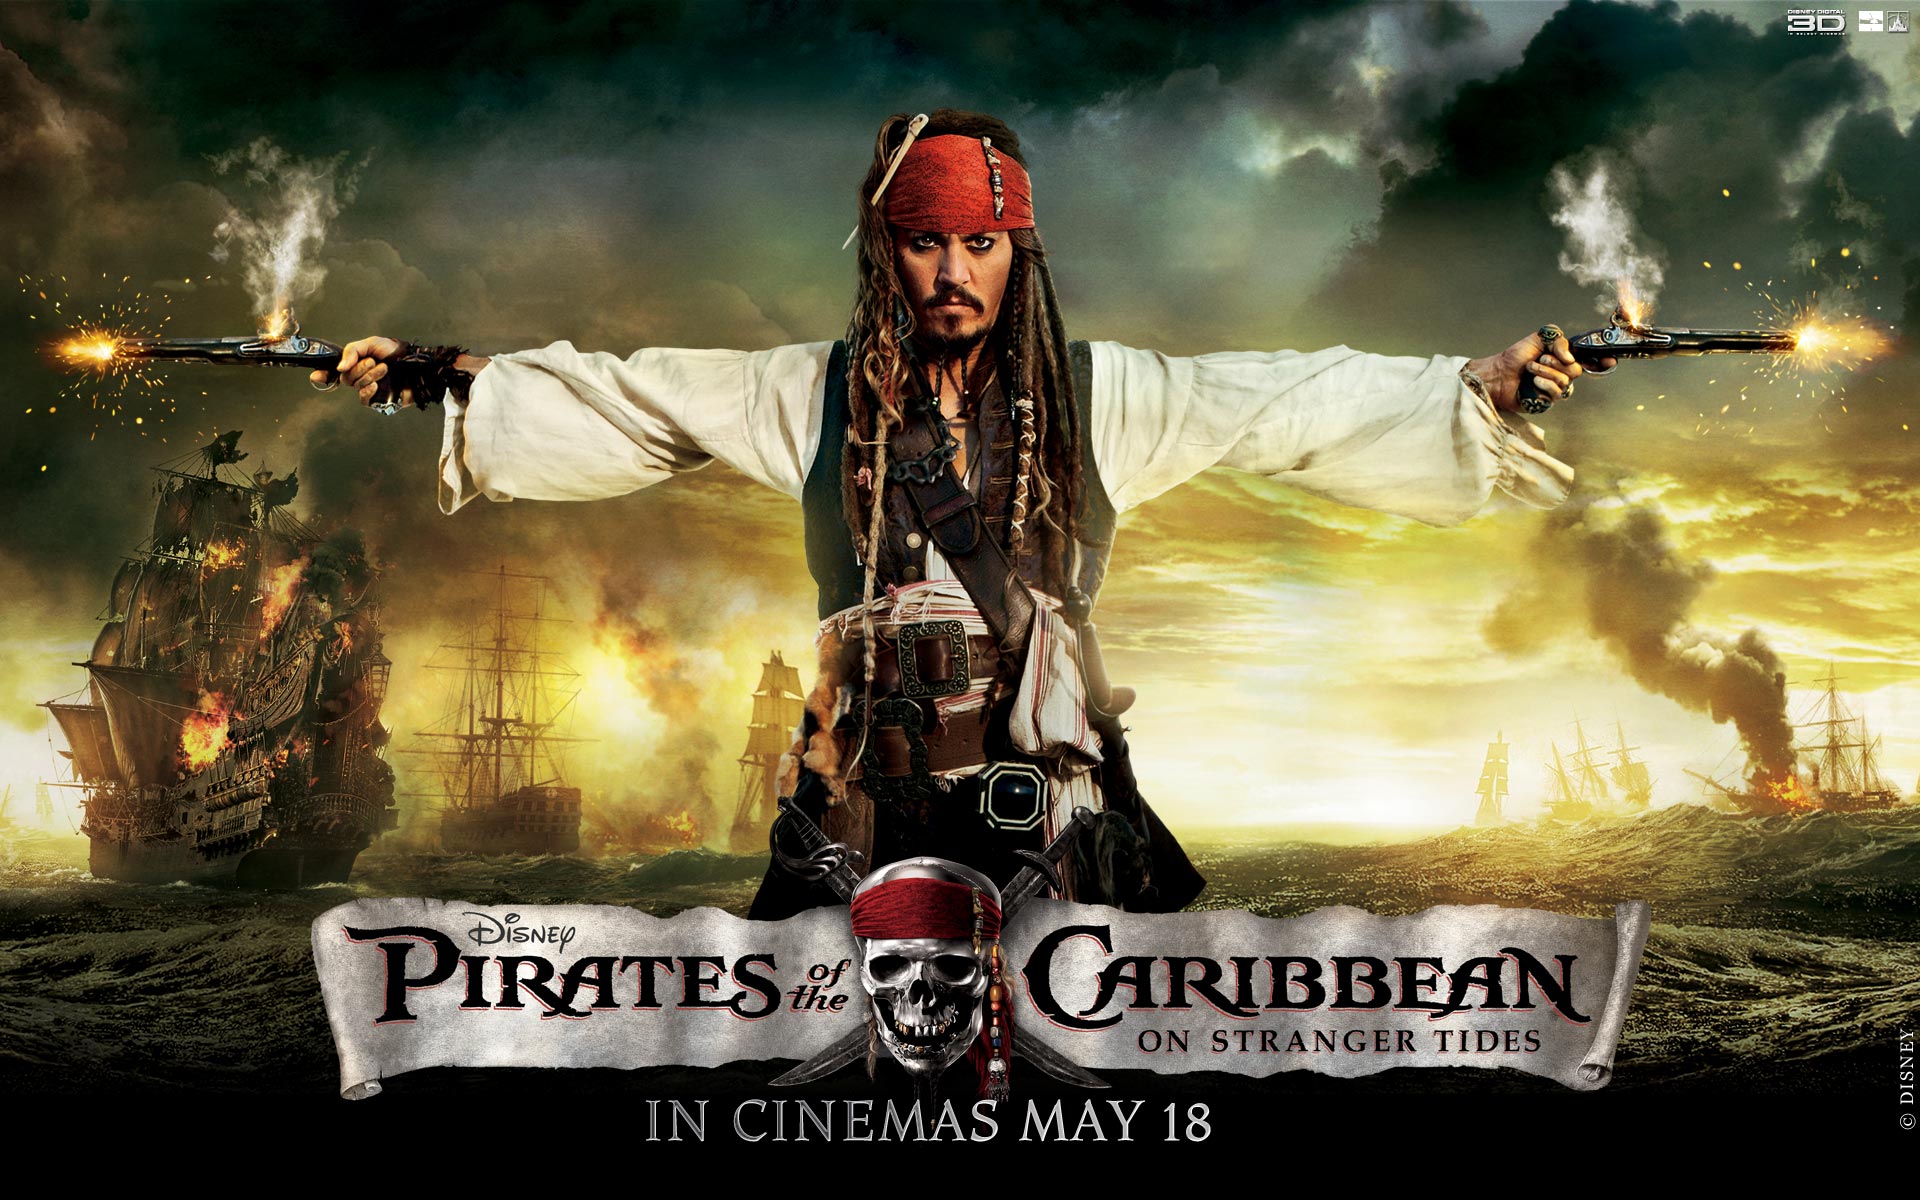 jack sparrow, pirates of the caribbean, pirates of the caribbean: on stranger tides, johnny depp, movie wallpaper for mobile